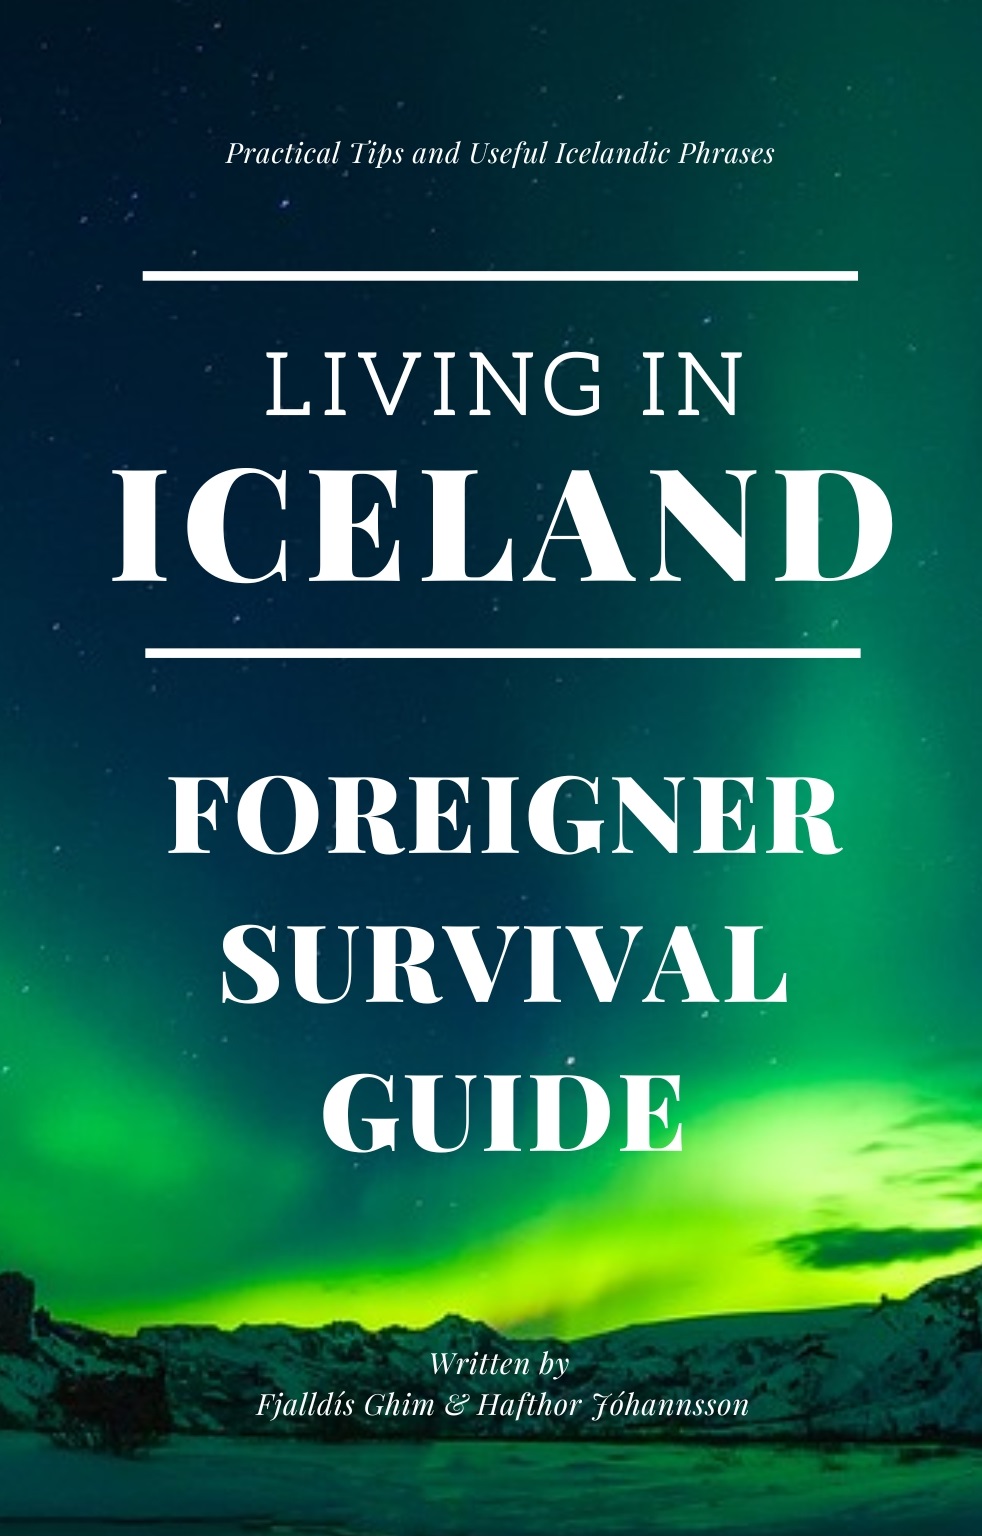 How to get a dream job in Iceland as a foreigner How to make friends in Iceland Understanding your Icelandic payslip How to make Icelandic friends (for dummies) . . .